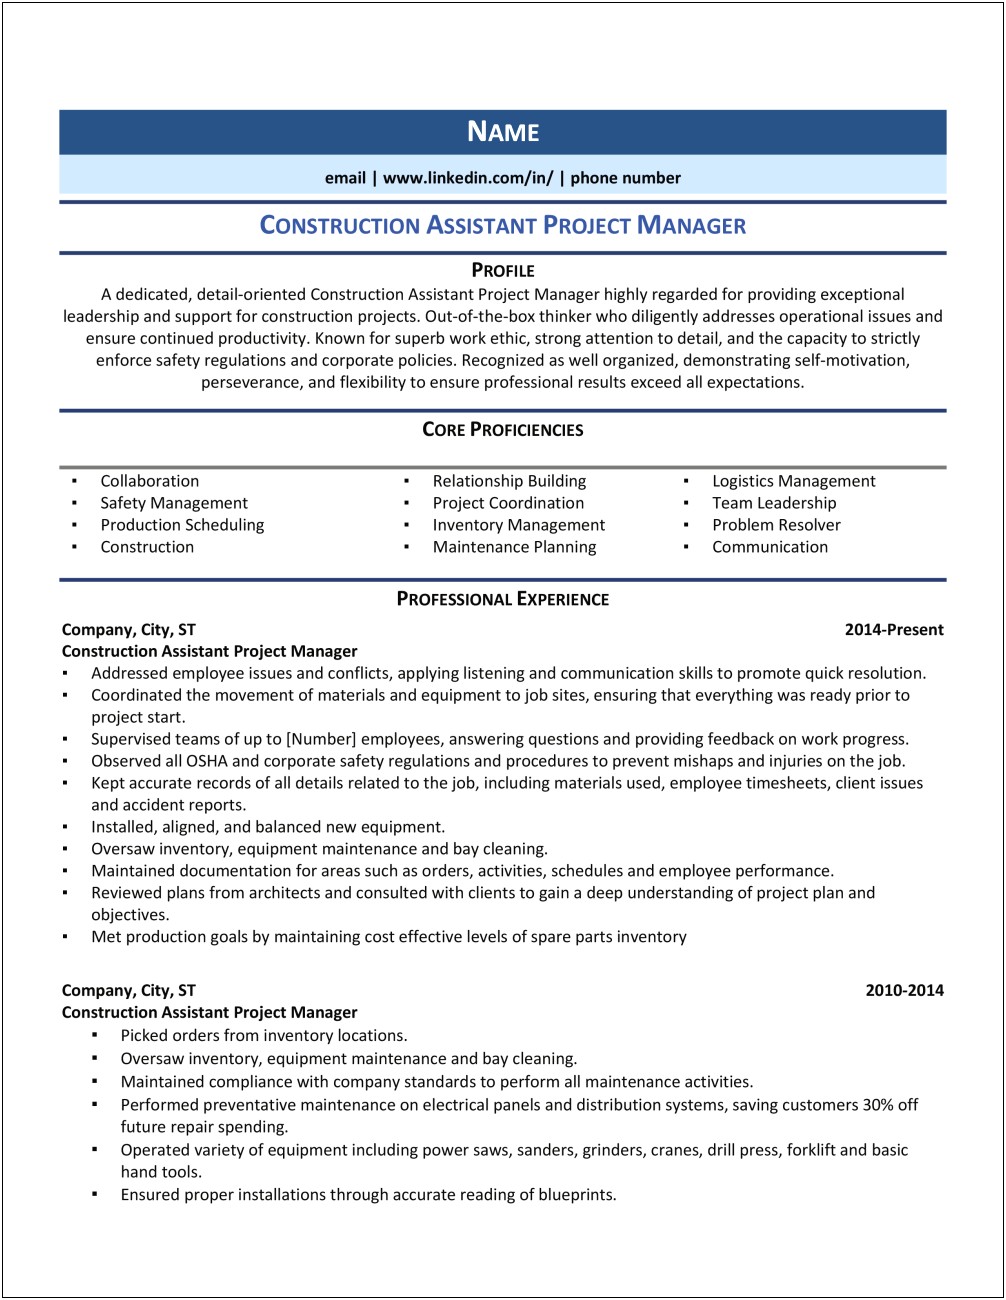 Resume Summary Construction Project Manager